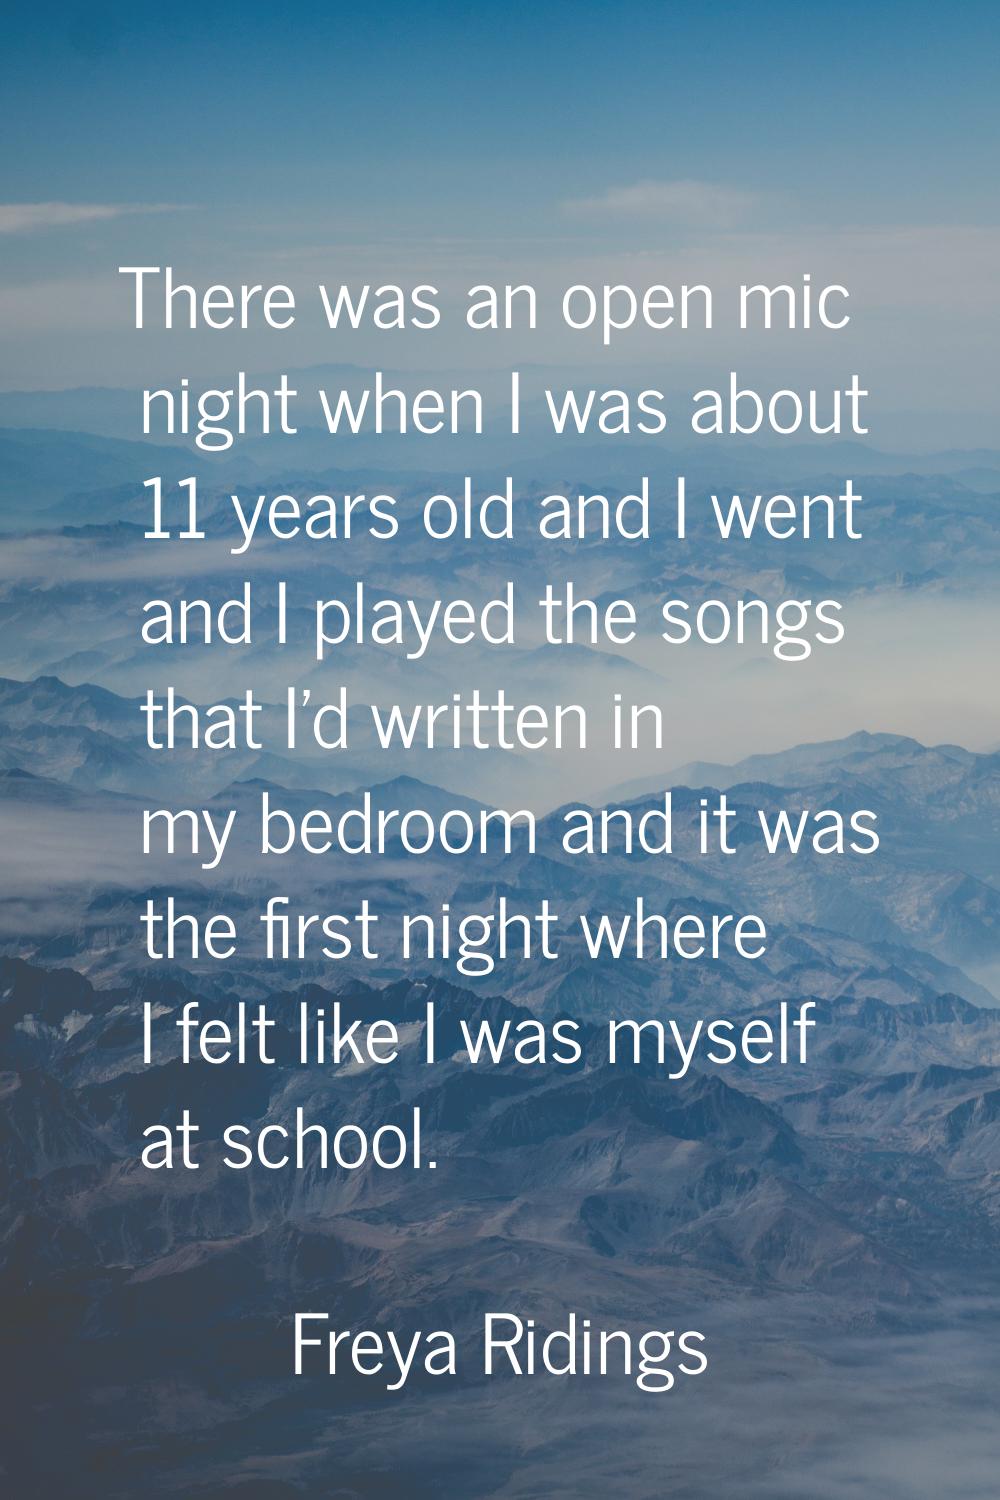 There was an open mic night when I was about 11 years old and I went and I played the songs that I'